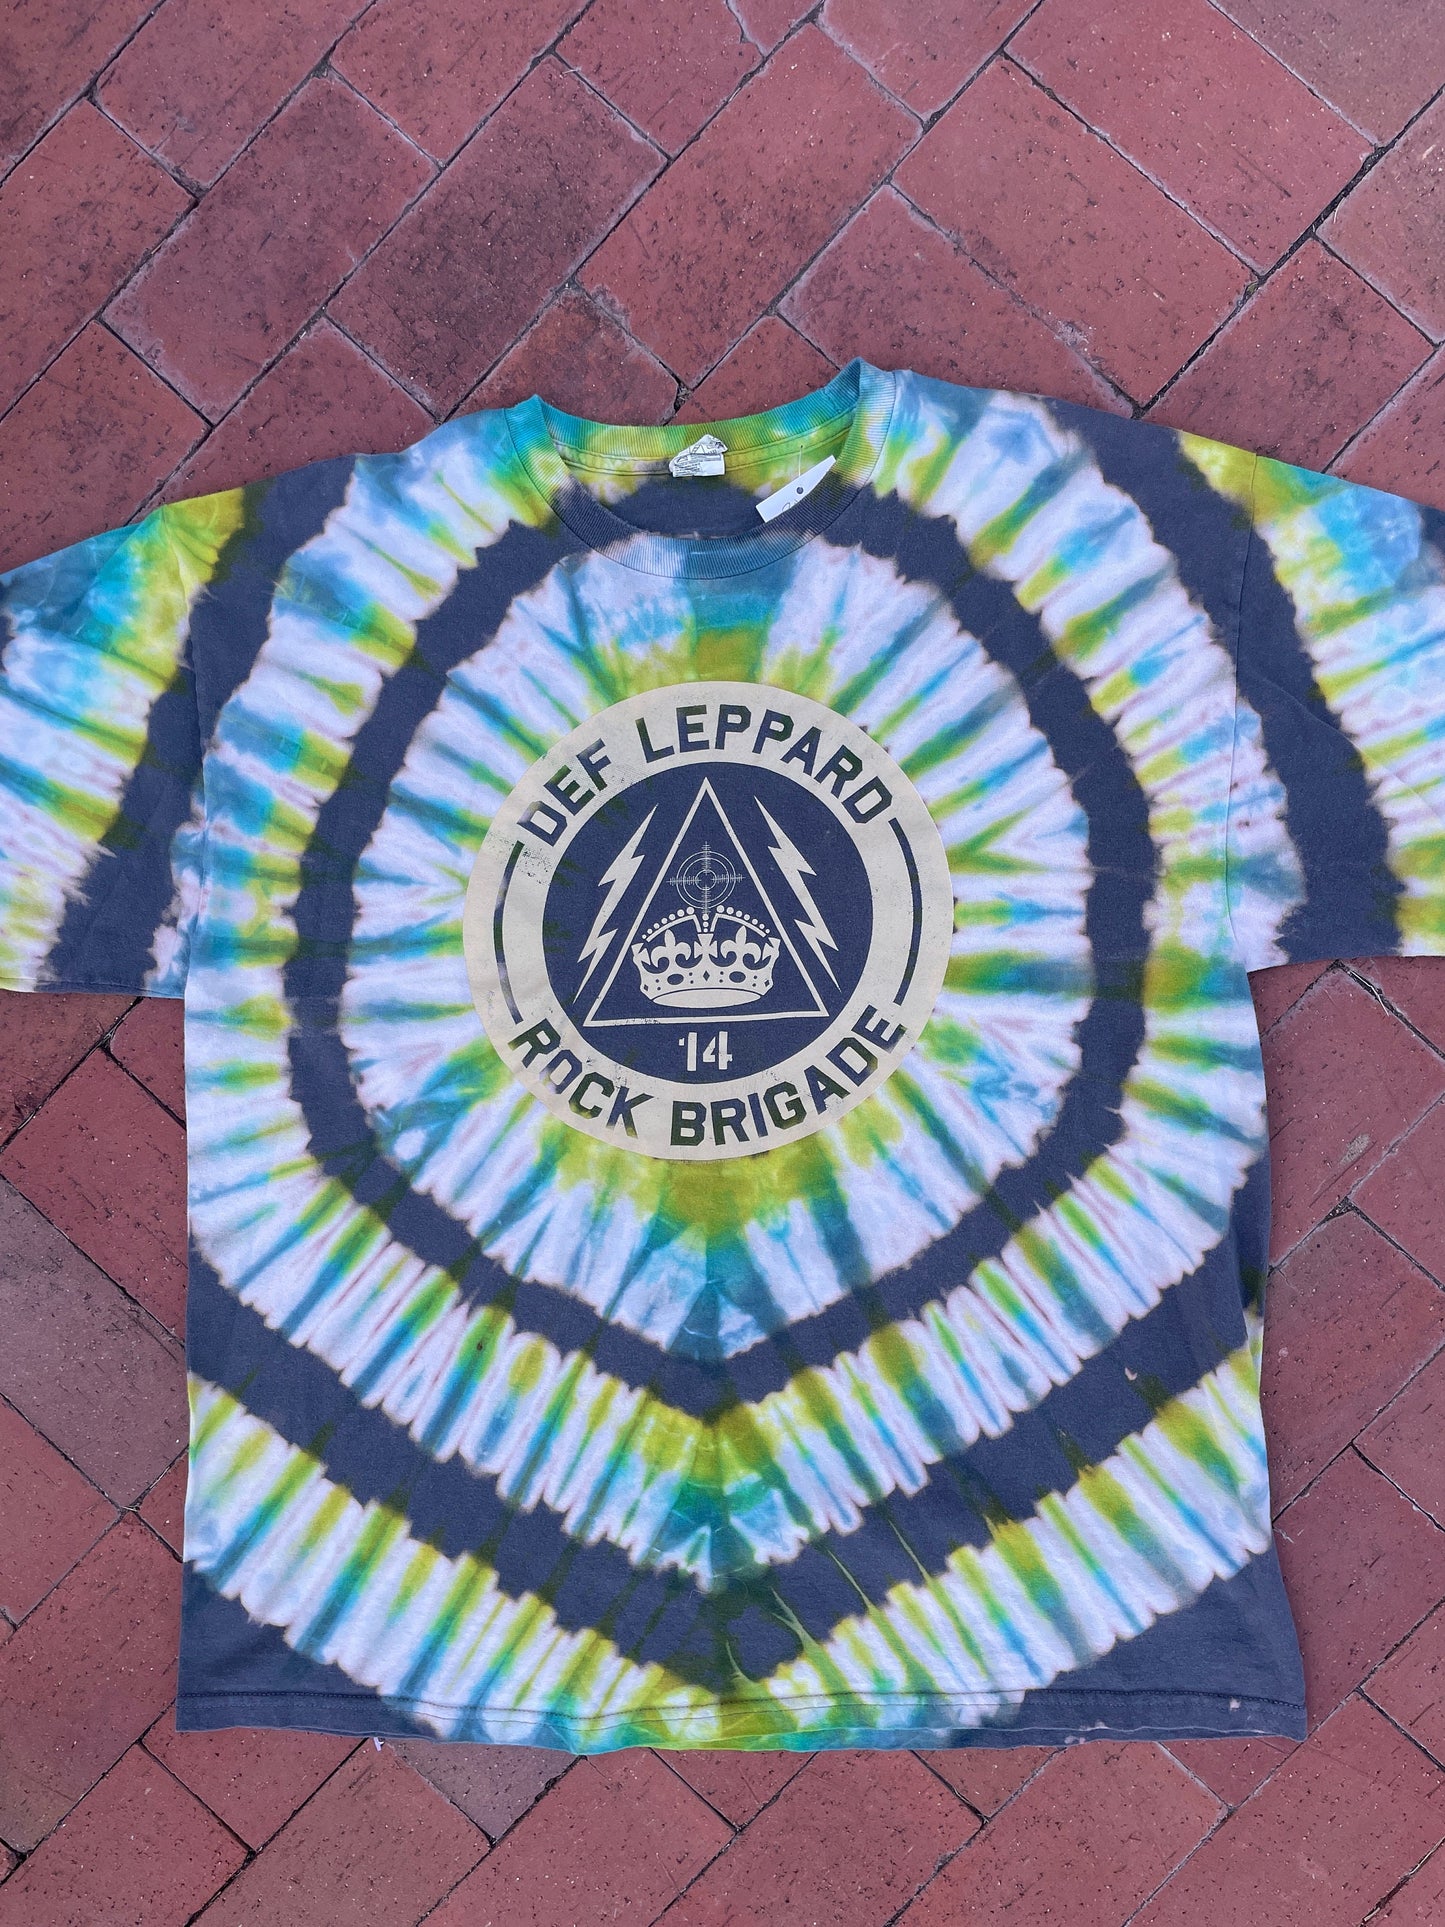 3XL Men’s Def Leppard 2014 Rock Brigade Tour Reverse Tie Dye Short Sleeve T-Shirt | One-Of-a-Kind Upcycled Gray and Green Tee